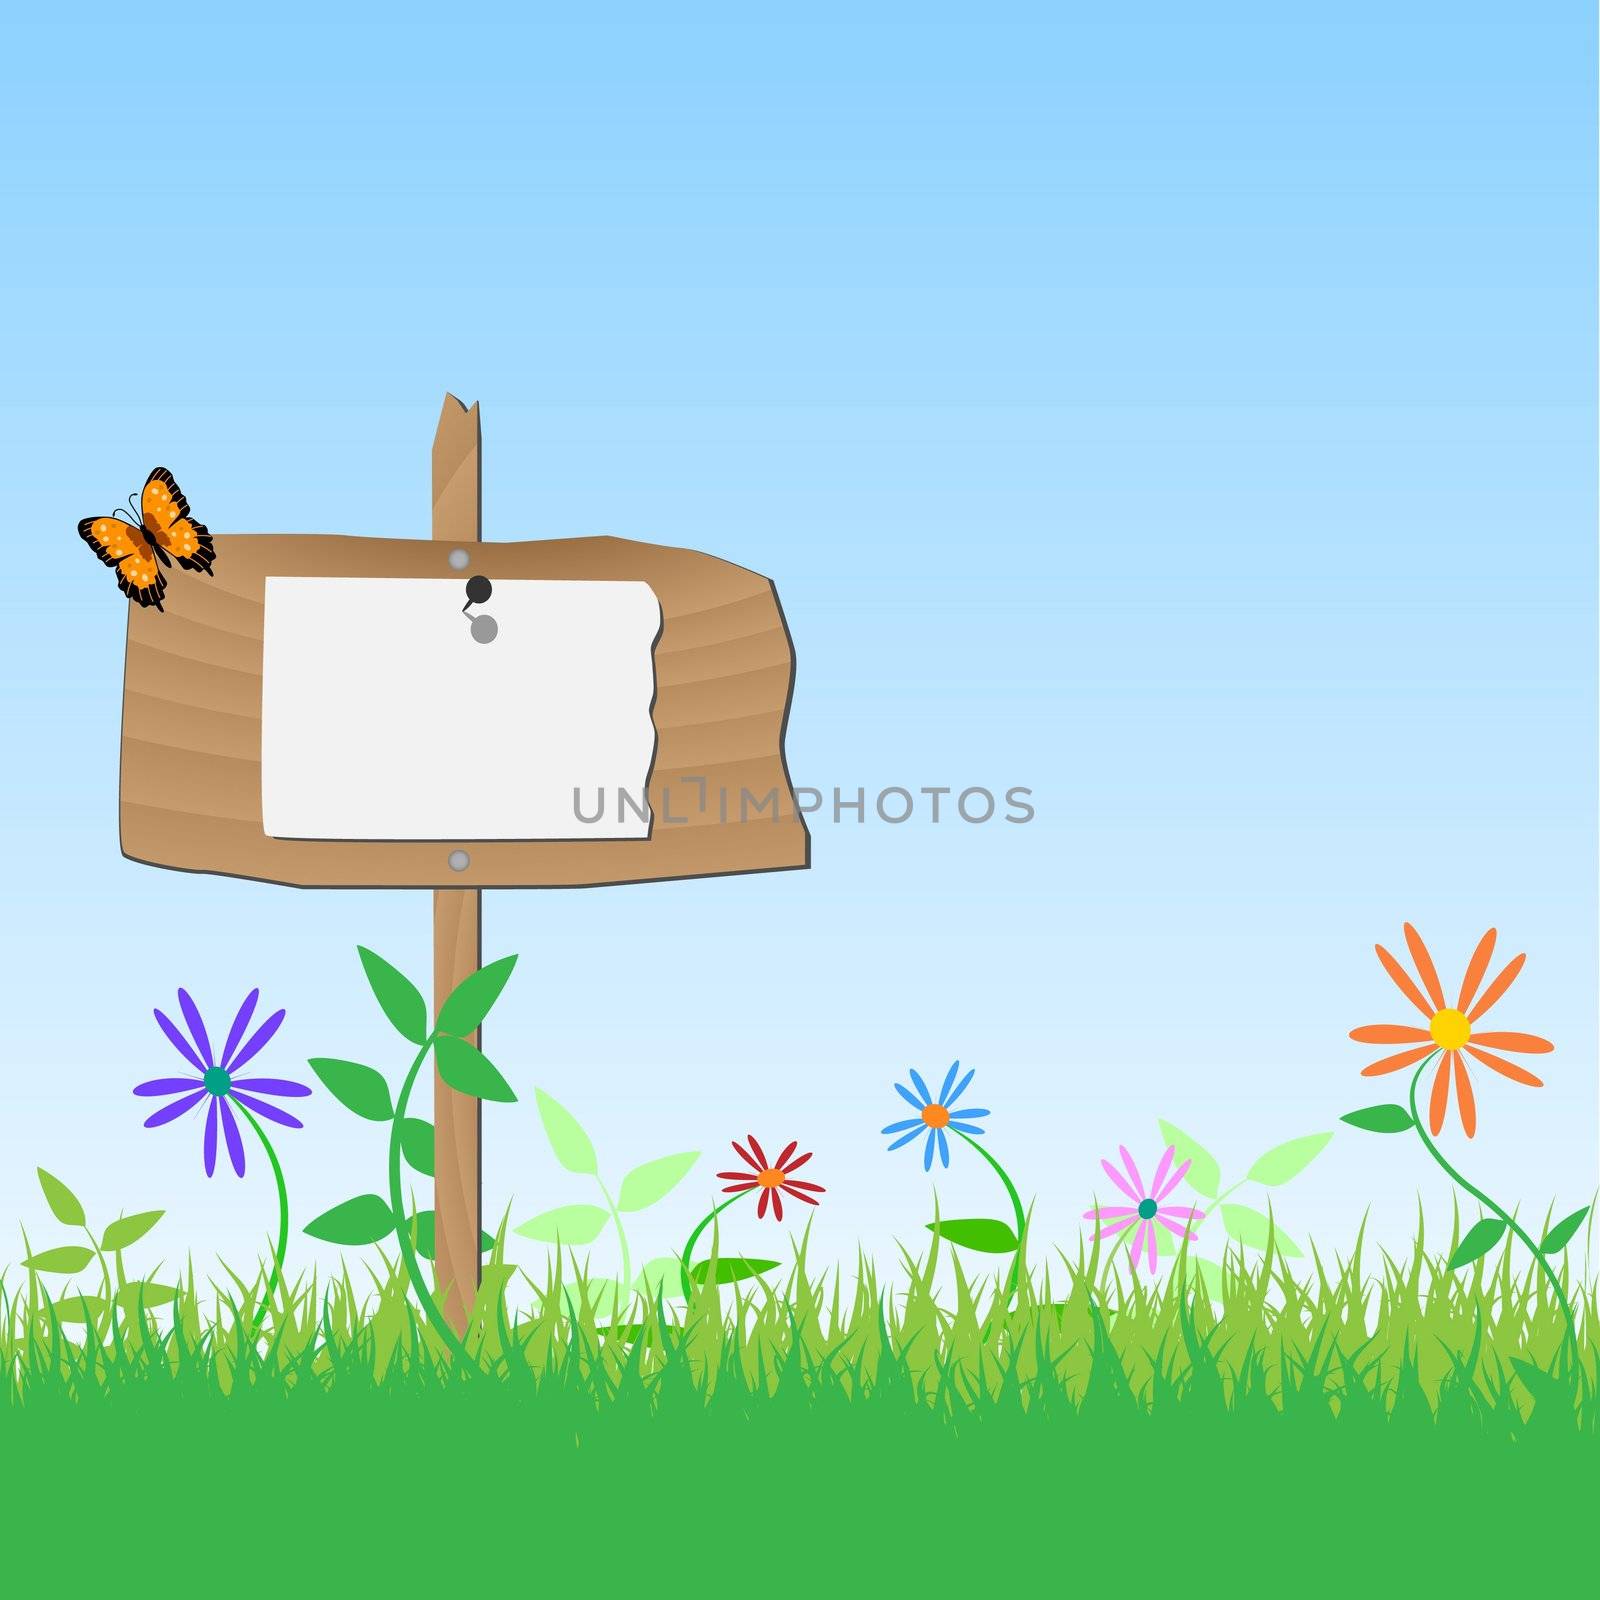 Image of a blank wooden sign with flowers, grass and sky.